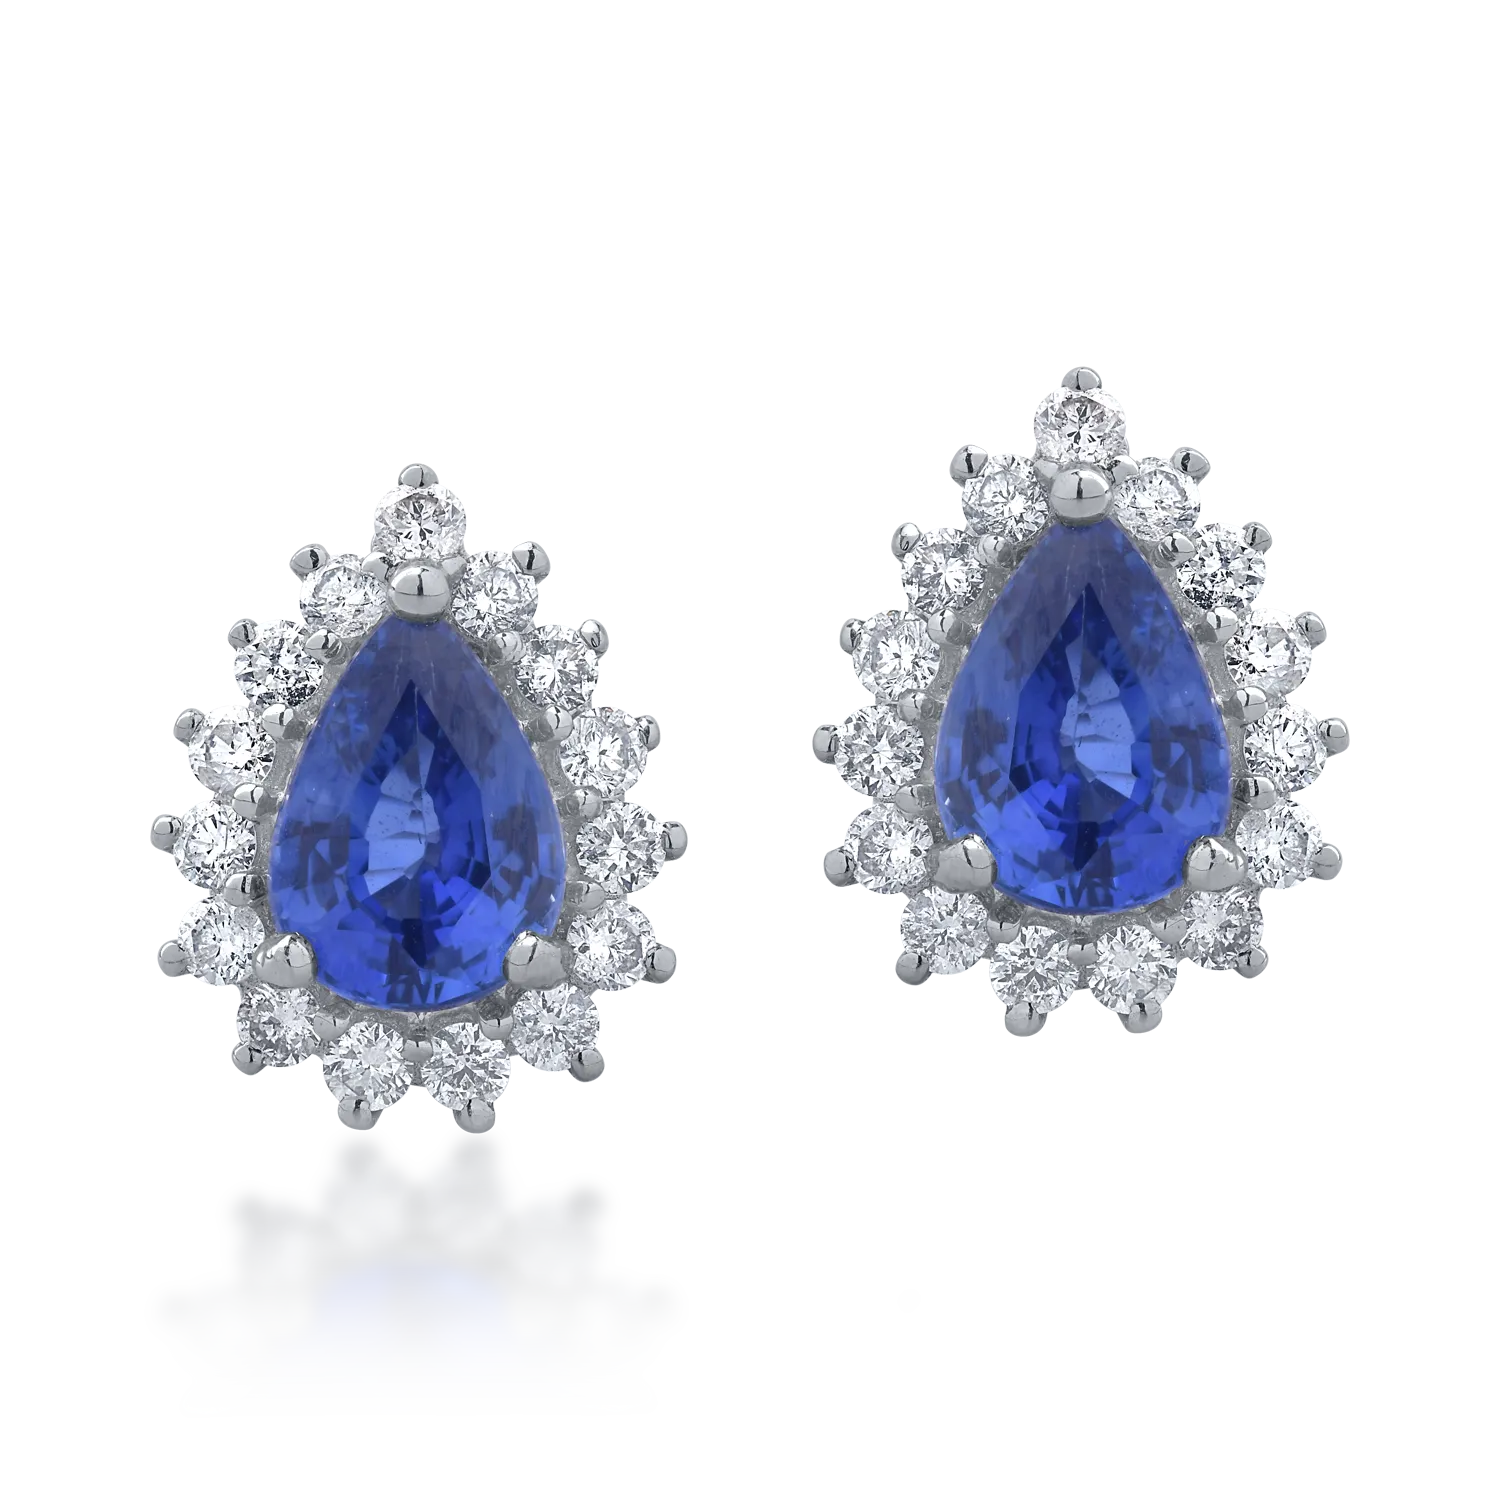 18K white gold earrings with 1.78ct sapphires and 0.44ct diamonds